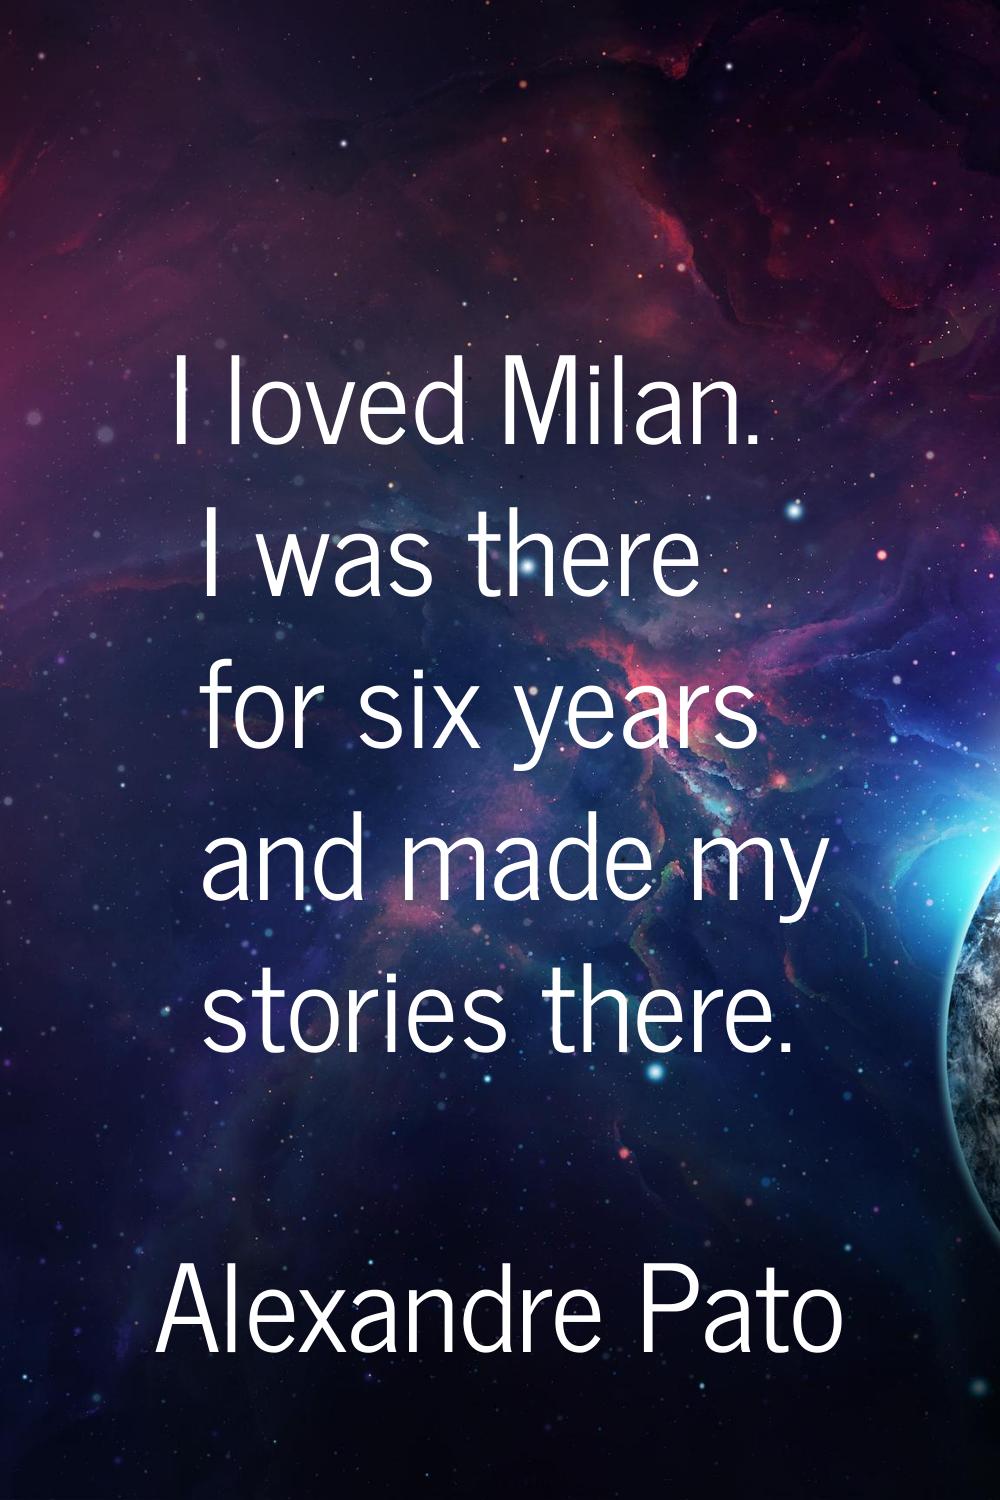 I loved Milan. I was there for six years and made my stories there.